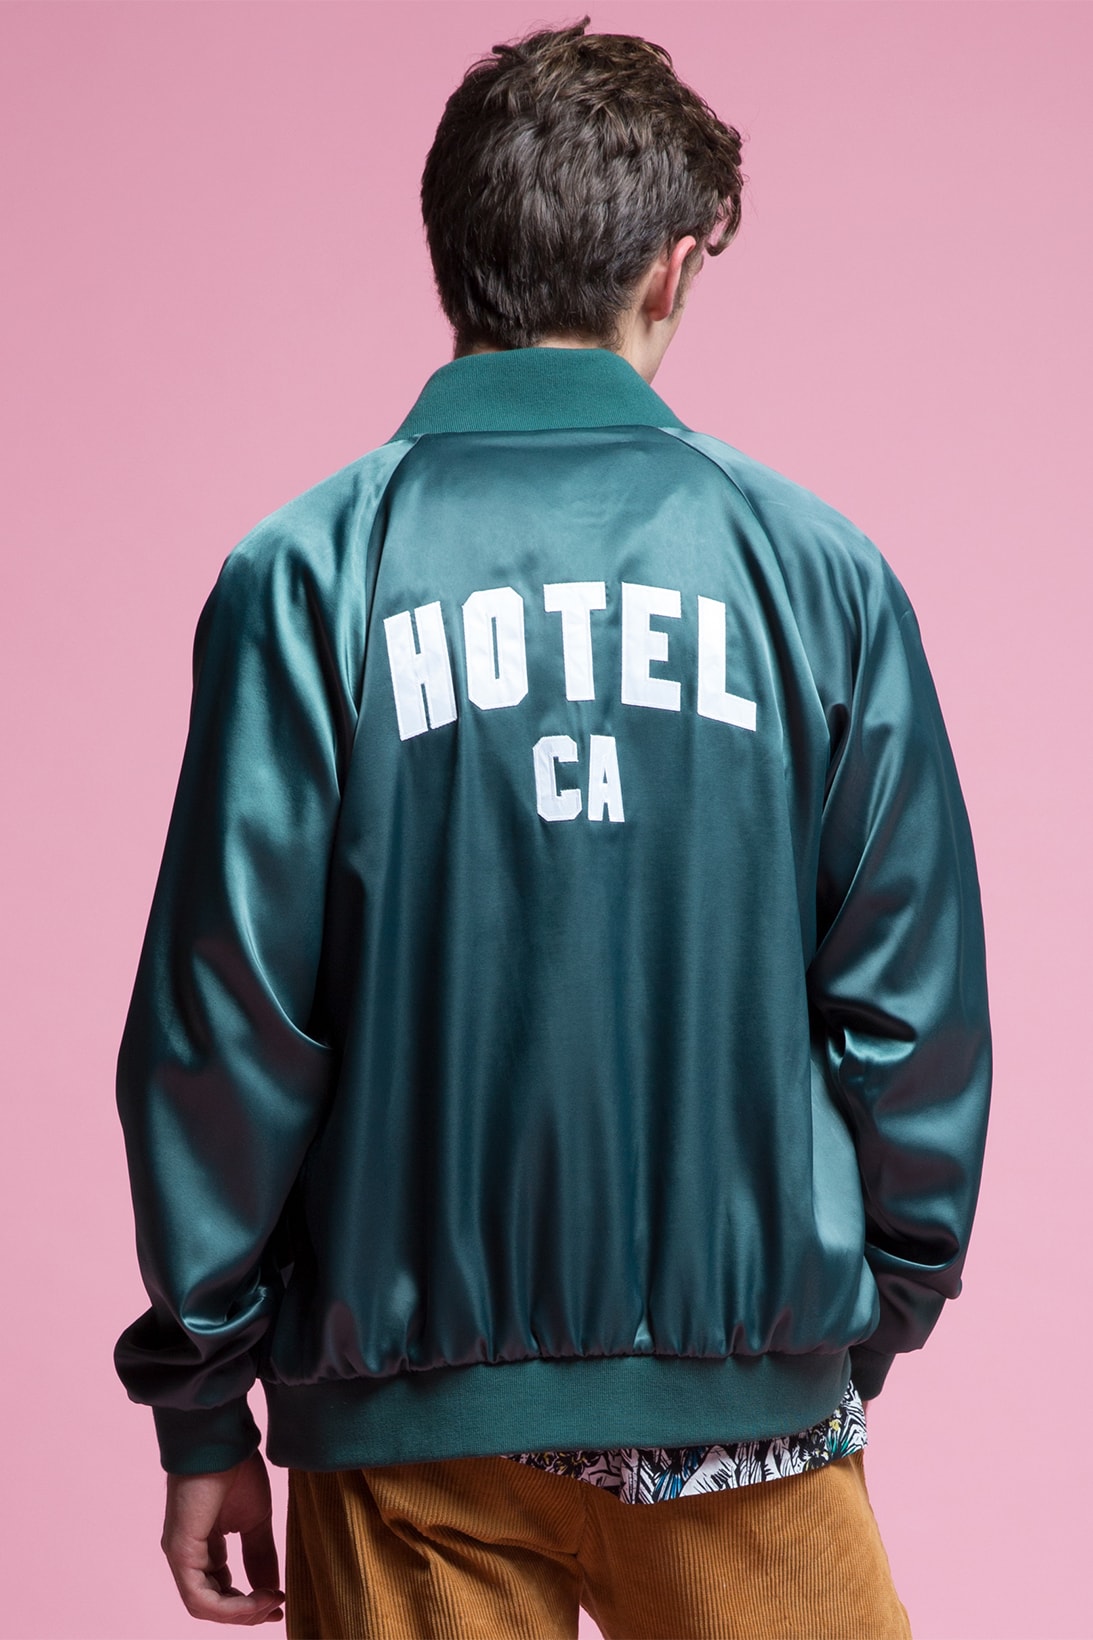 HOTEL 1171 2017 Holiday Collection Lookbook Limited Edition Satin Stadium Jackets French Terry Sweat suit pants hoodie logo branding California